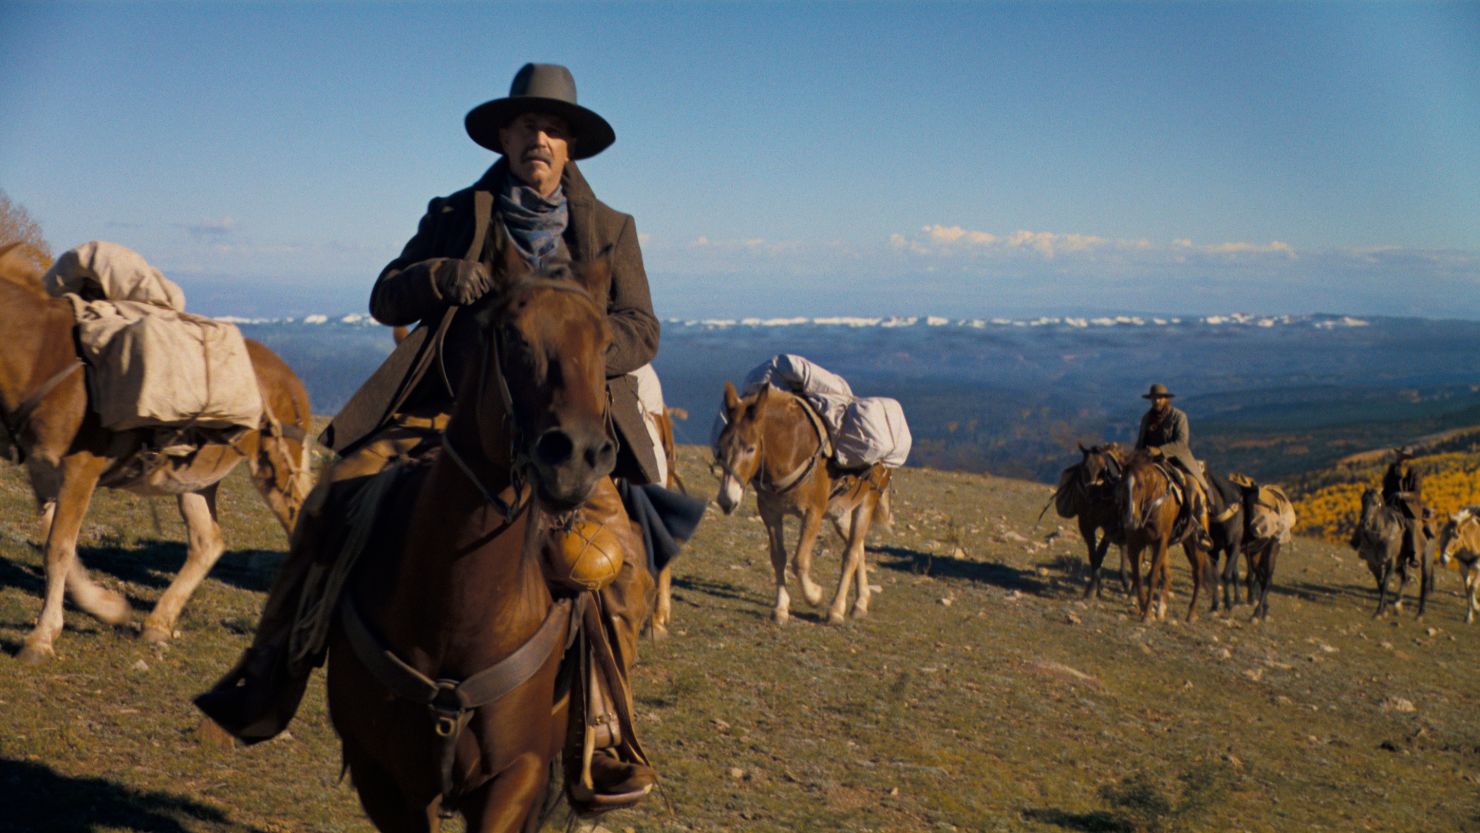 Kevin Costner in a scene from "Horizon: An American Saga."